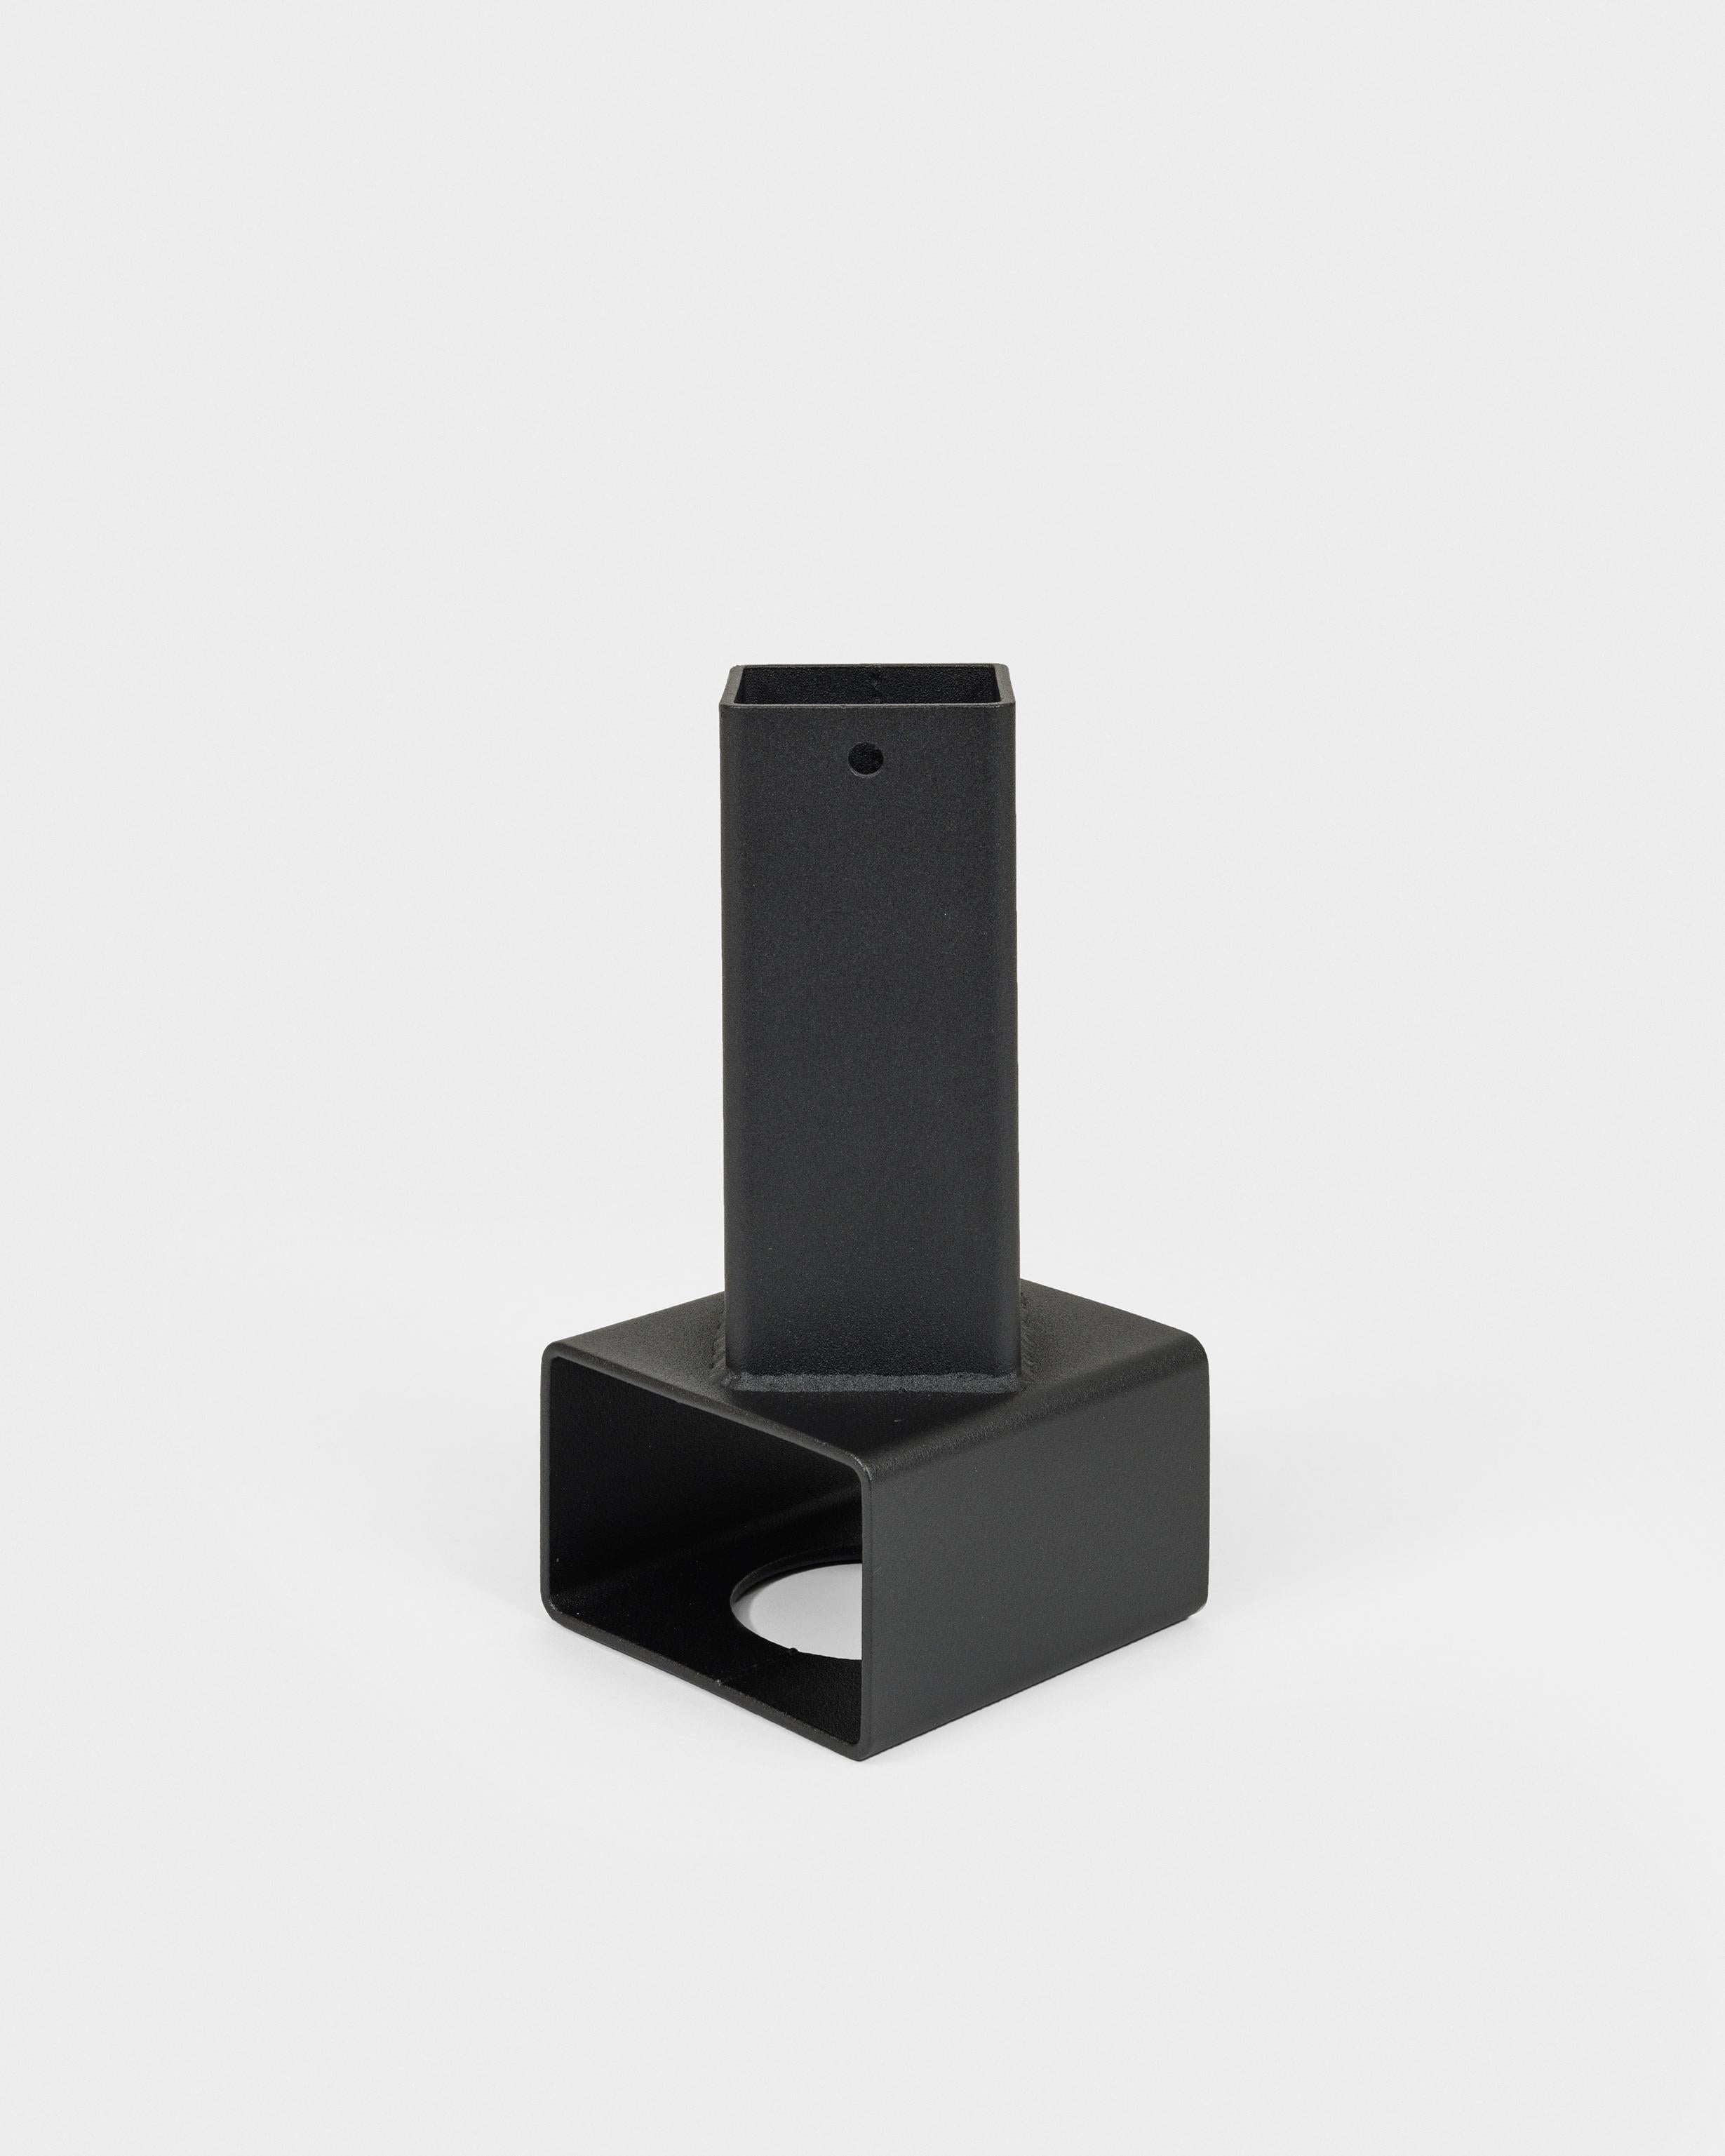 A welded steel vase with textured matte black powA welded steel vase with textured matte black powdercoat finish. The black metal vase combines brute industrialism with De-Stijl formalism. Pair with flowers and your favorite black metal album for a